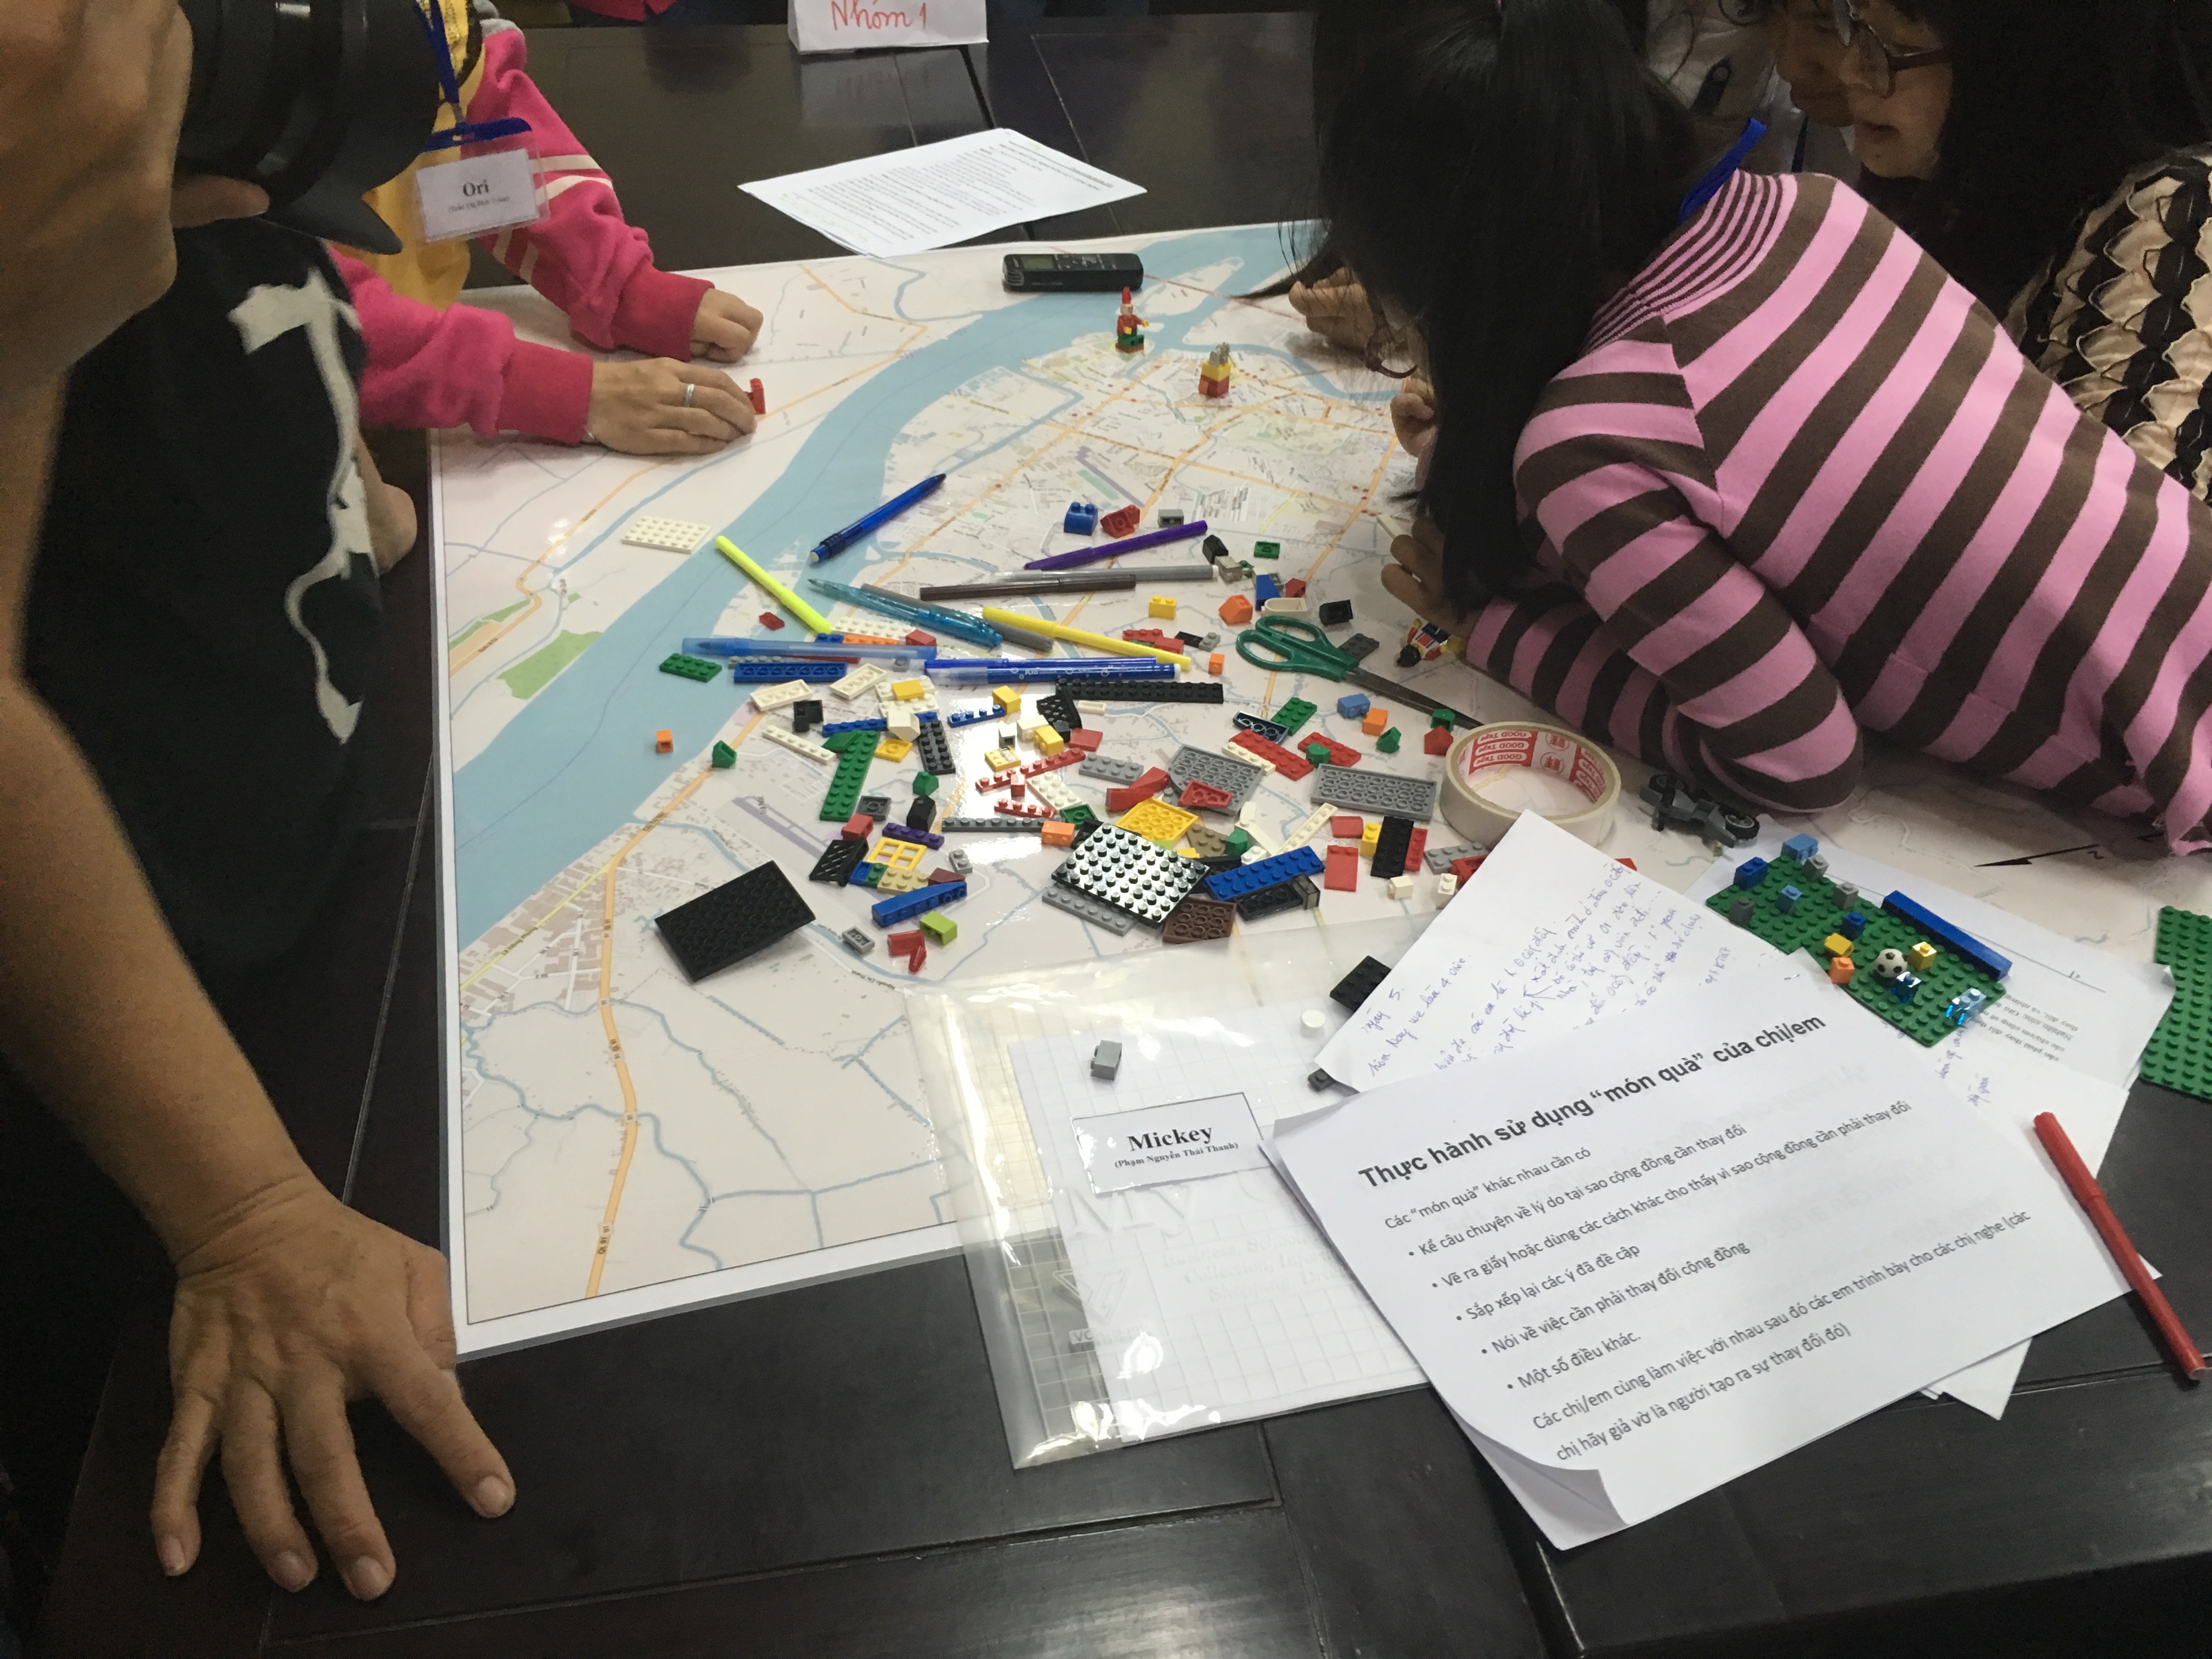 Girls surrounding a map with lego and documents